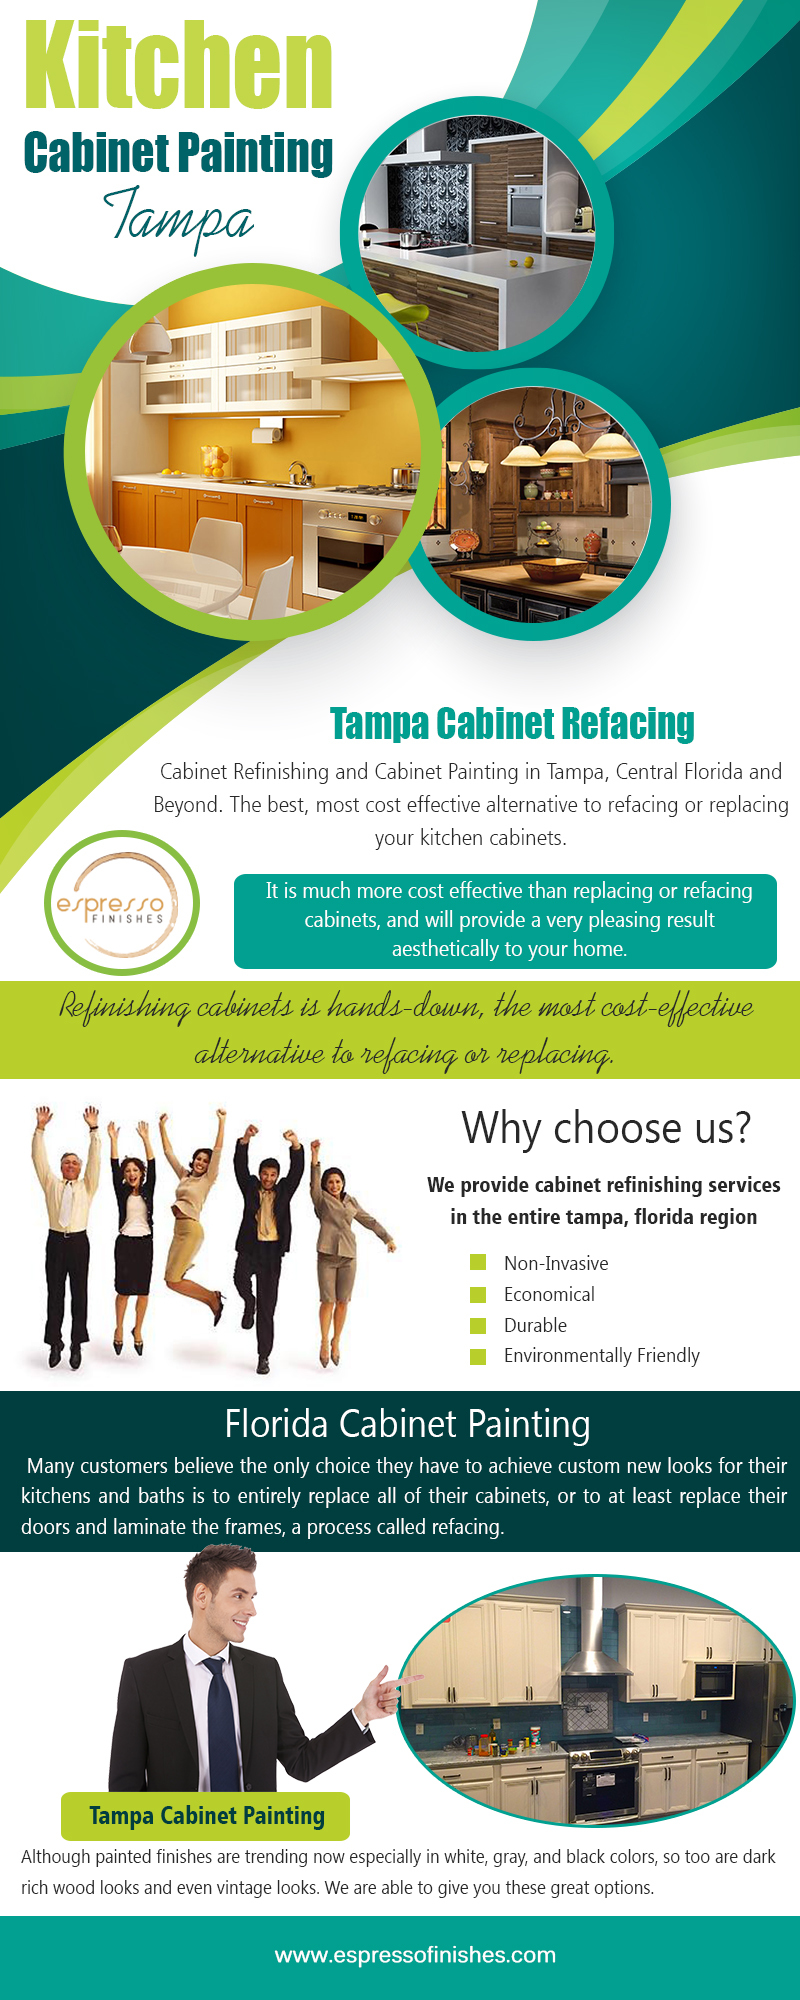 Kitchen Cabinet Painting Tampa